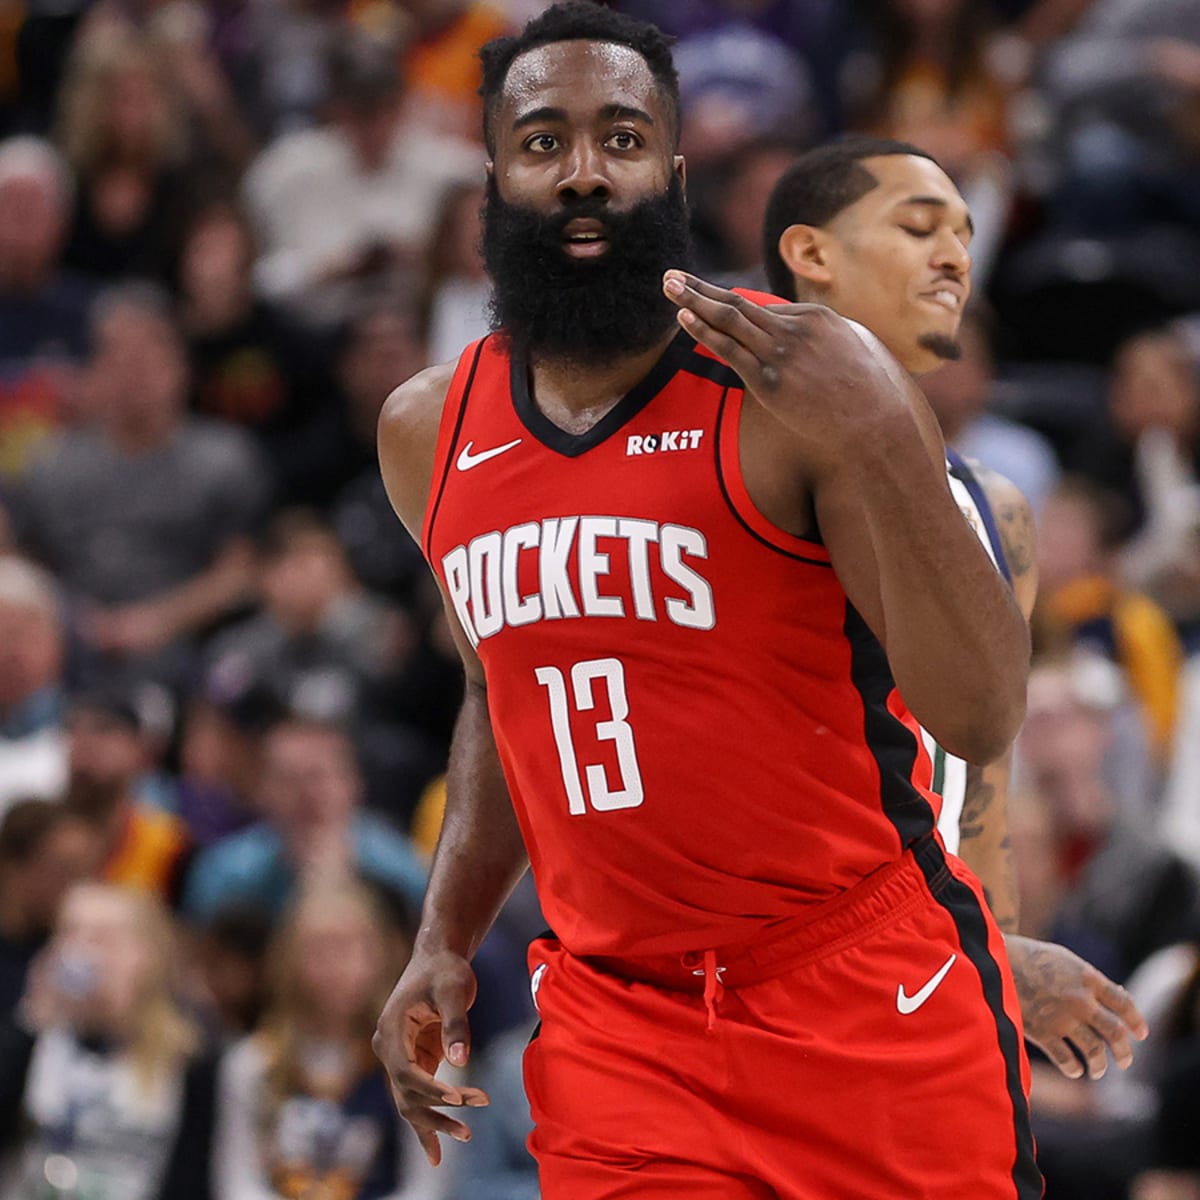 Harden playing for the Houston Rockets in the NBA.
